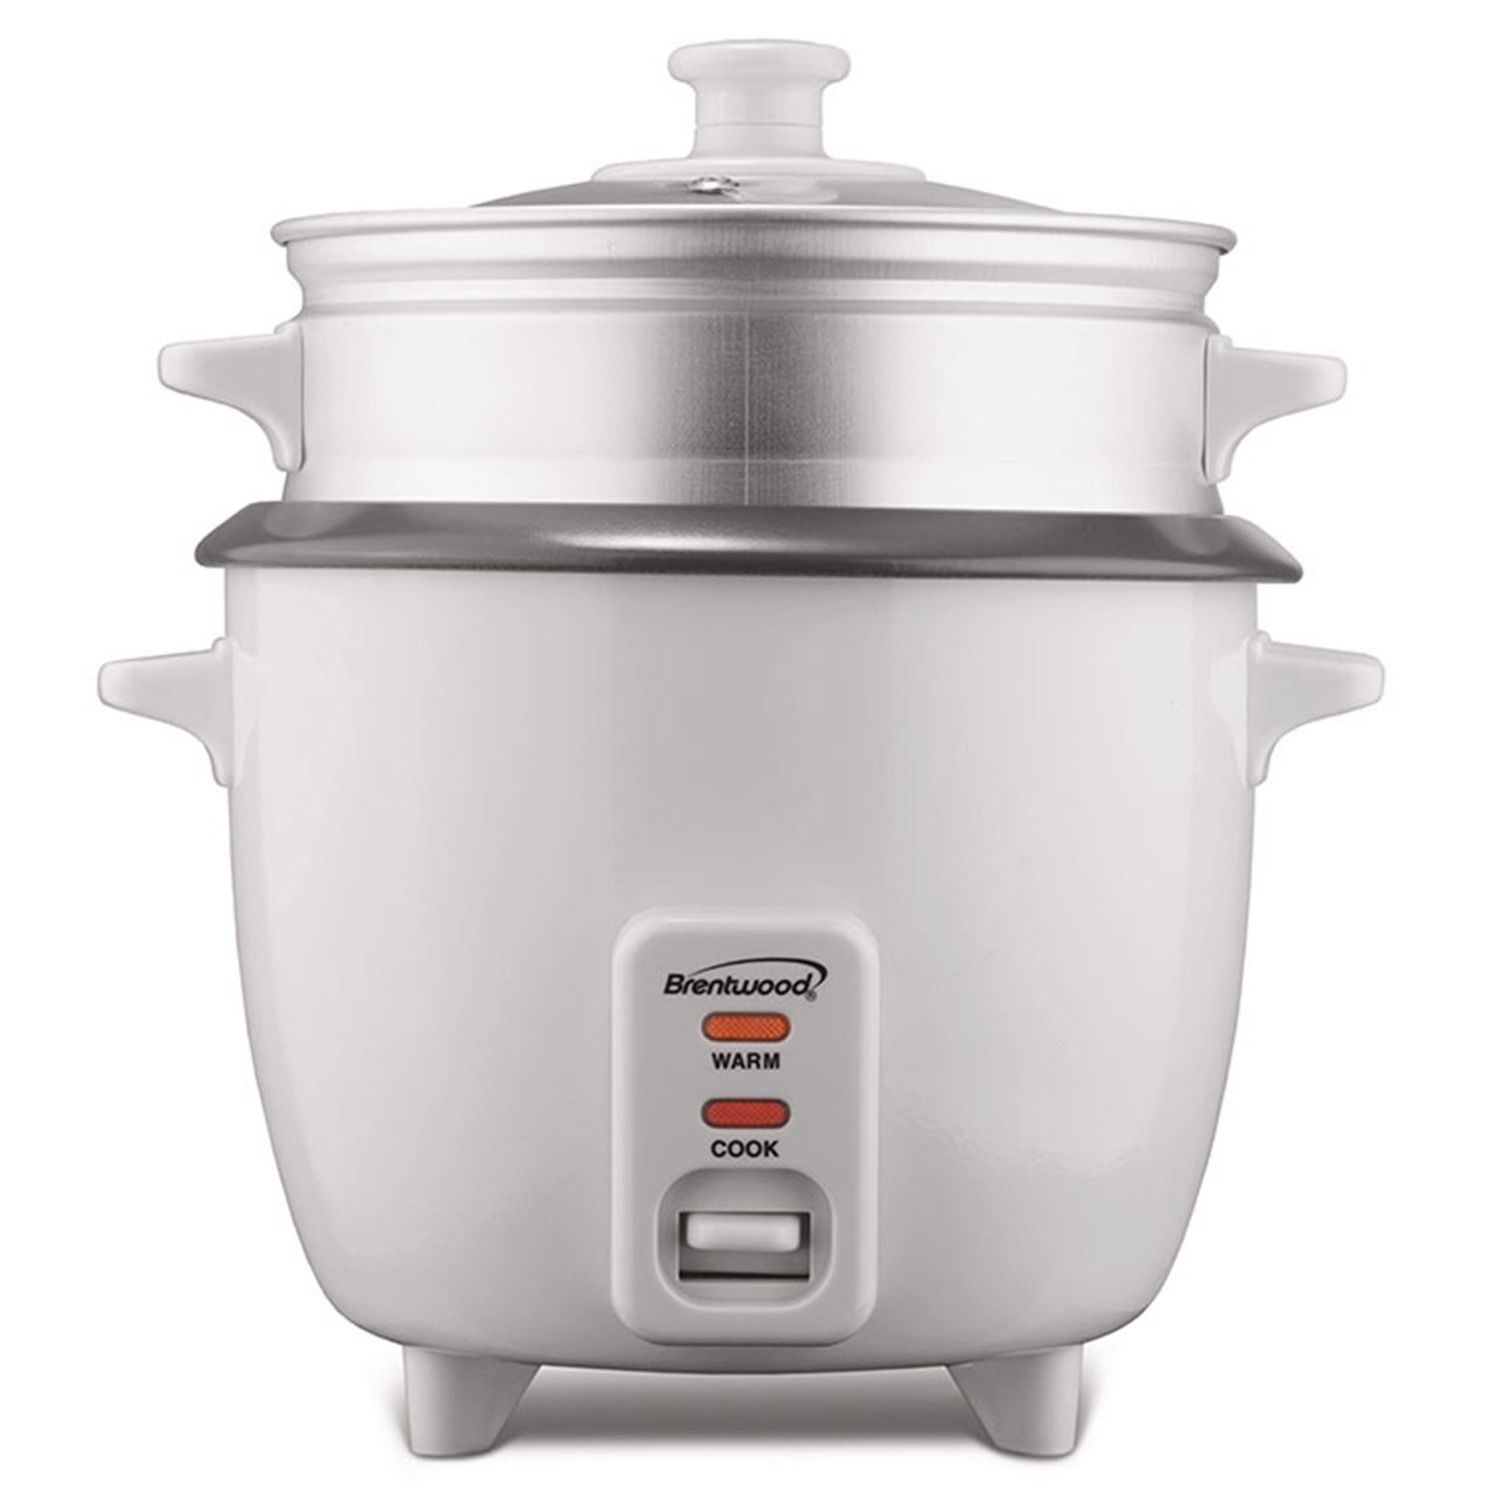 Hamilton Beach Rice Cooker and Food Steamer, 30 Cups Cooked (15